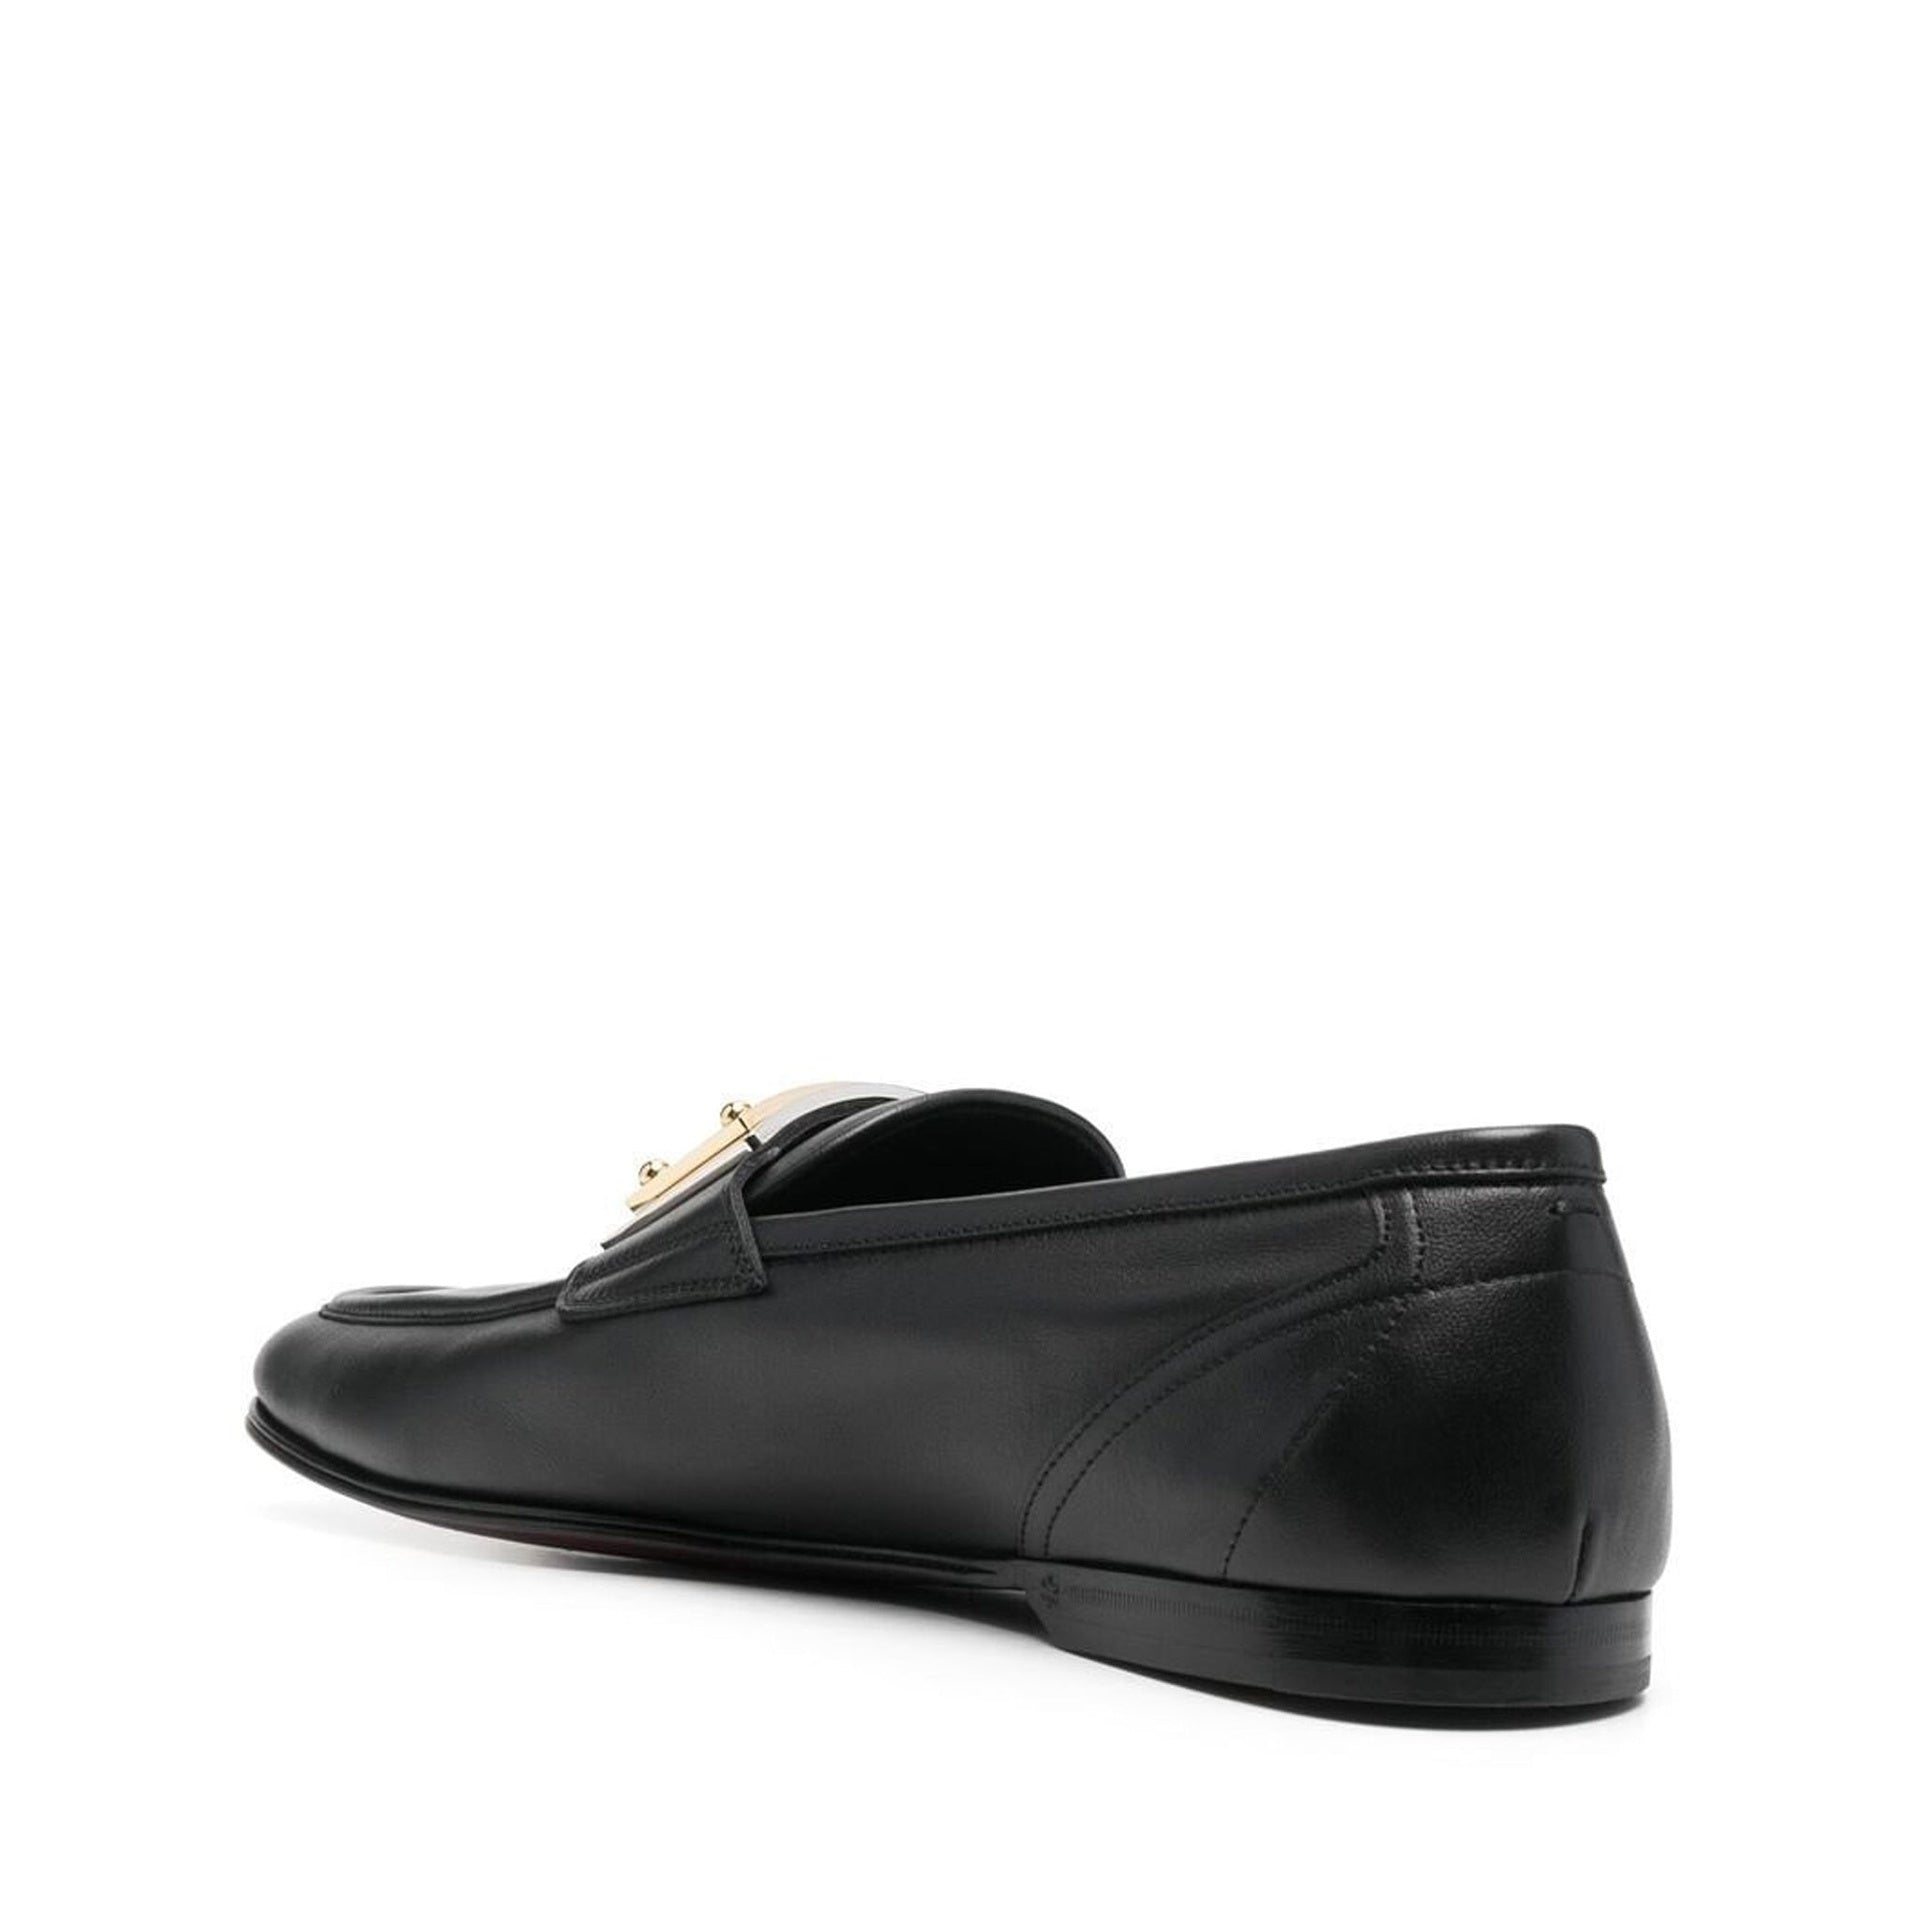 DOLCE-GABBANA-OUTLET-SALE-Dolce-Gabbana-Leather-Logo-Loafers-Flache-Schuhe-ARCHIVE-COLLECTION-3.jpg